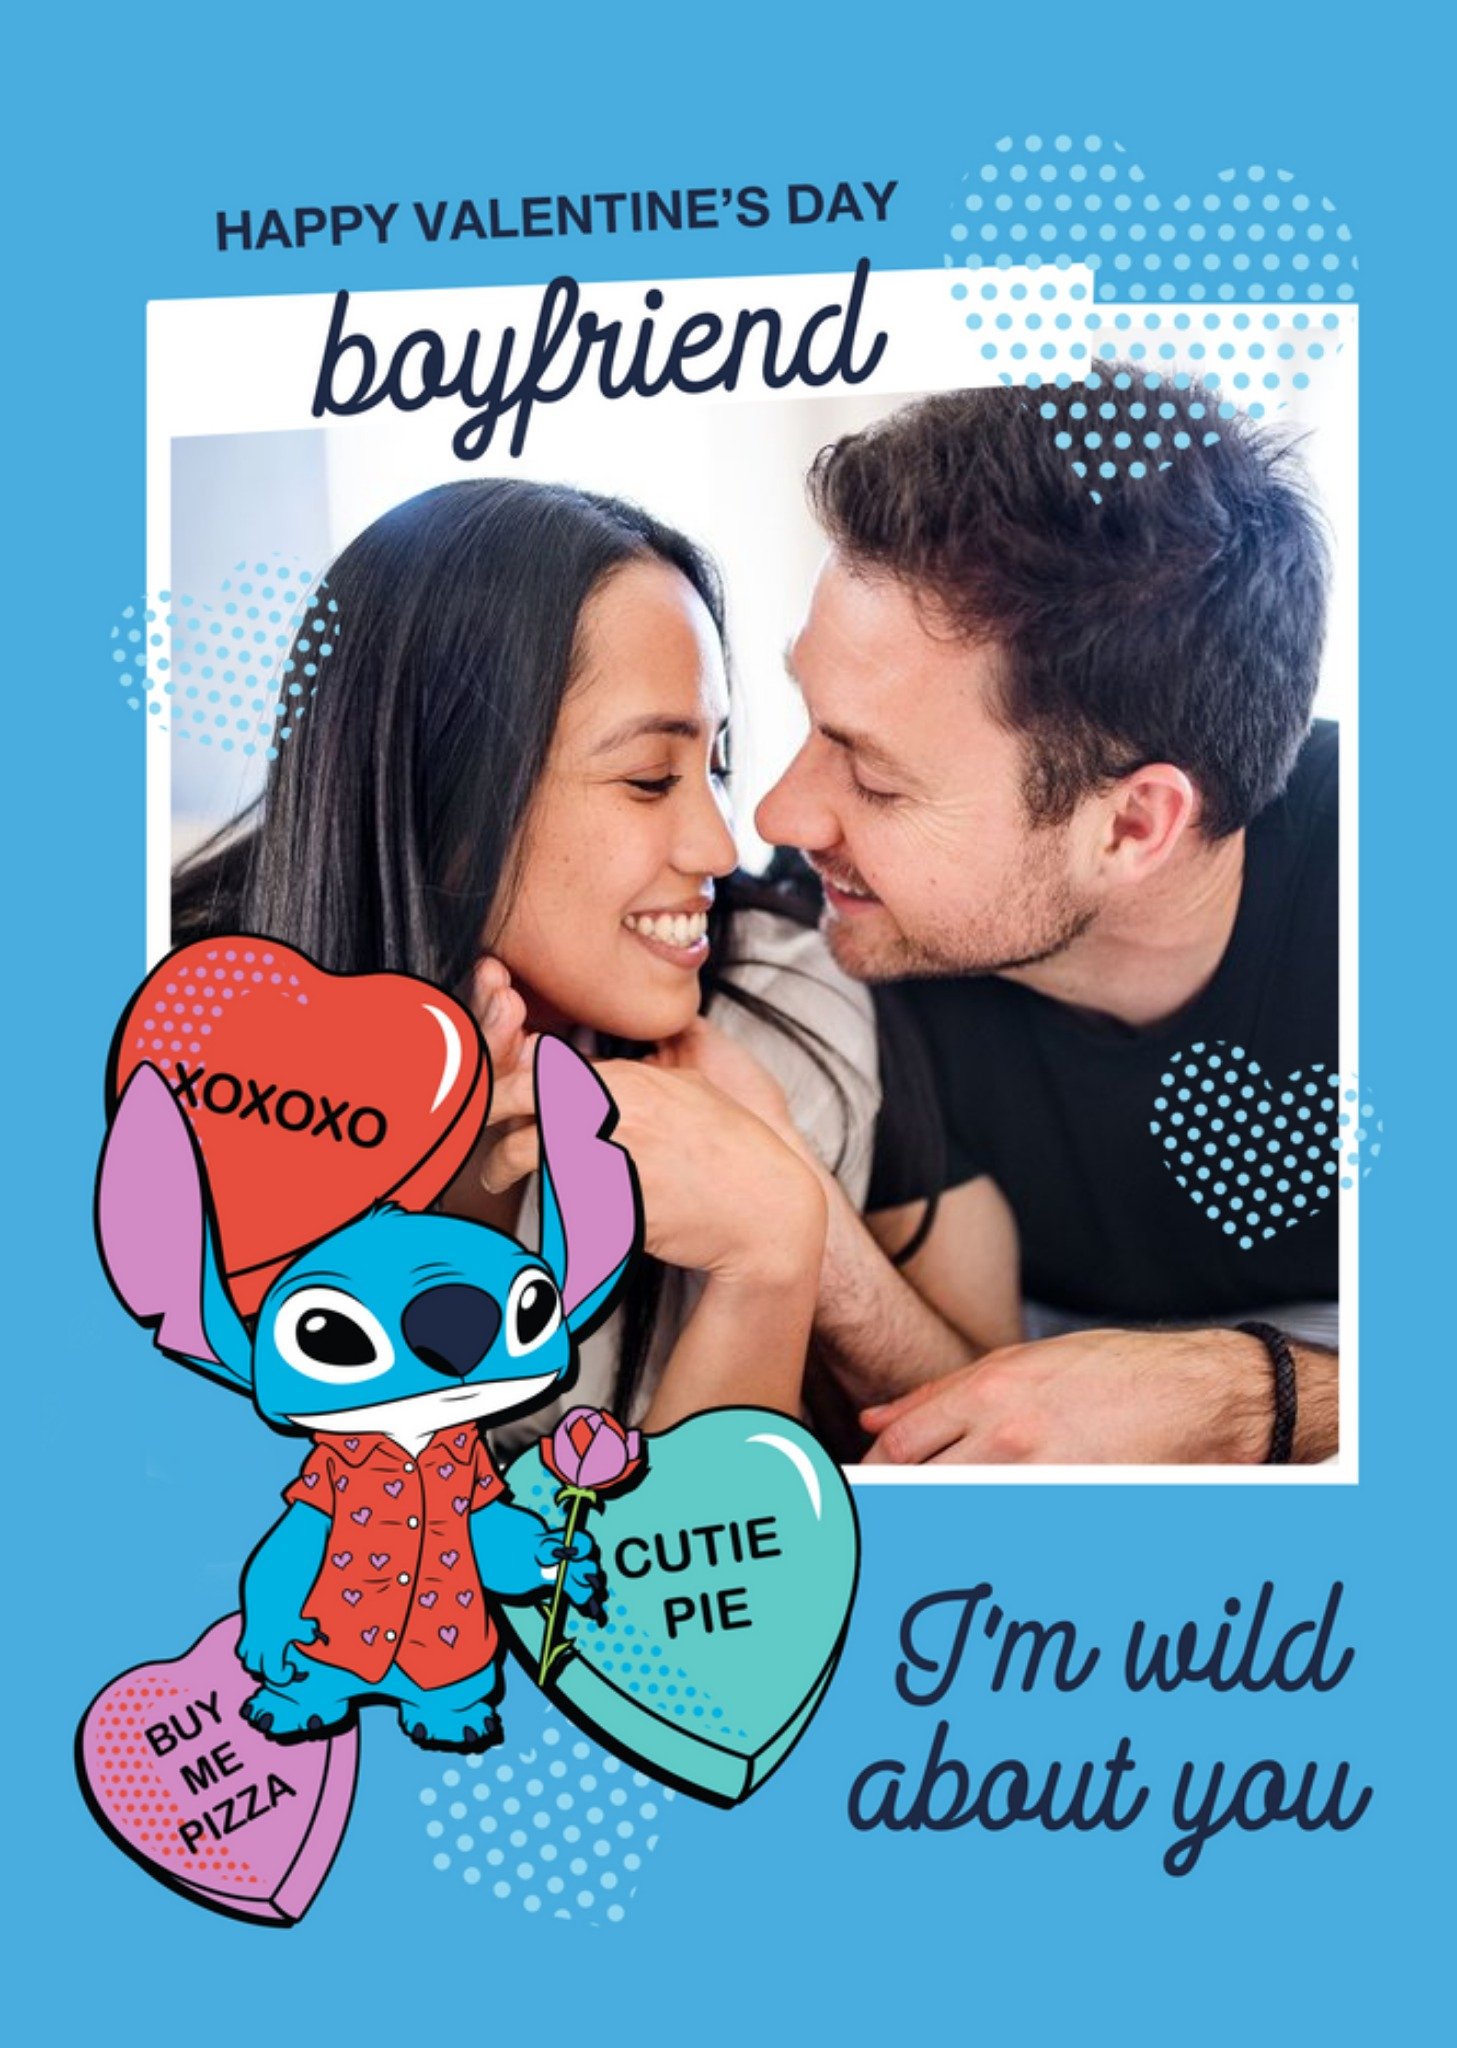 Disney Lilo And Stitch Wild About You Photo Upload Valentine's Card, Large